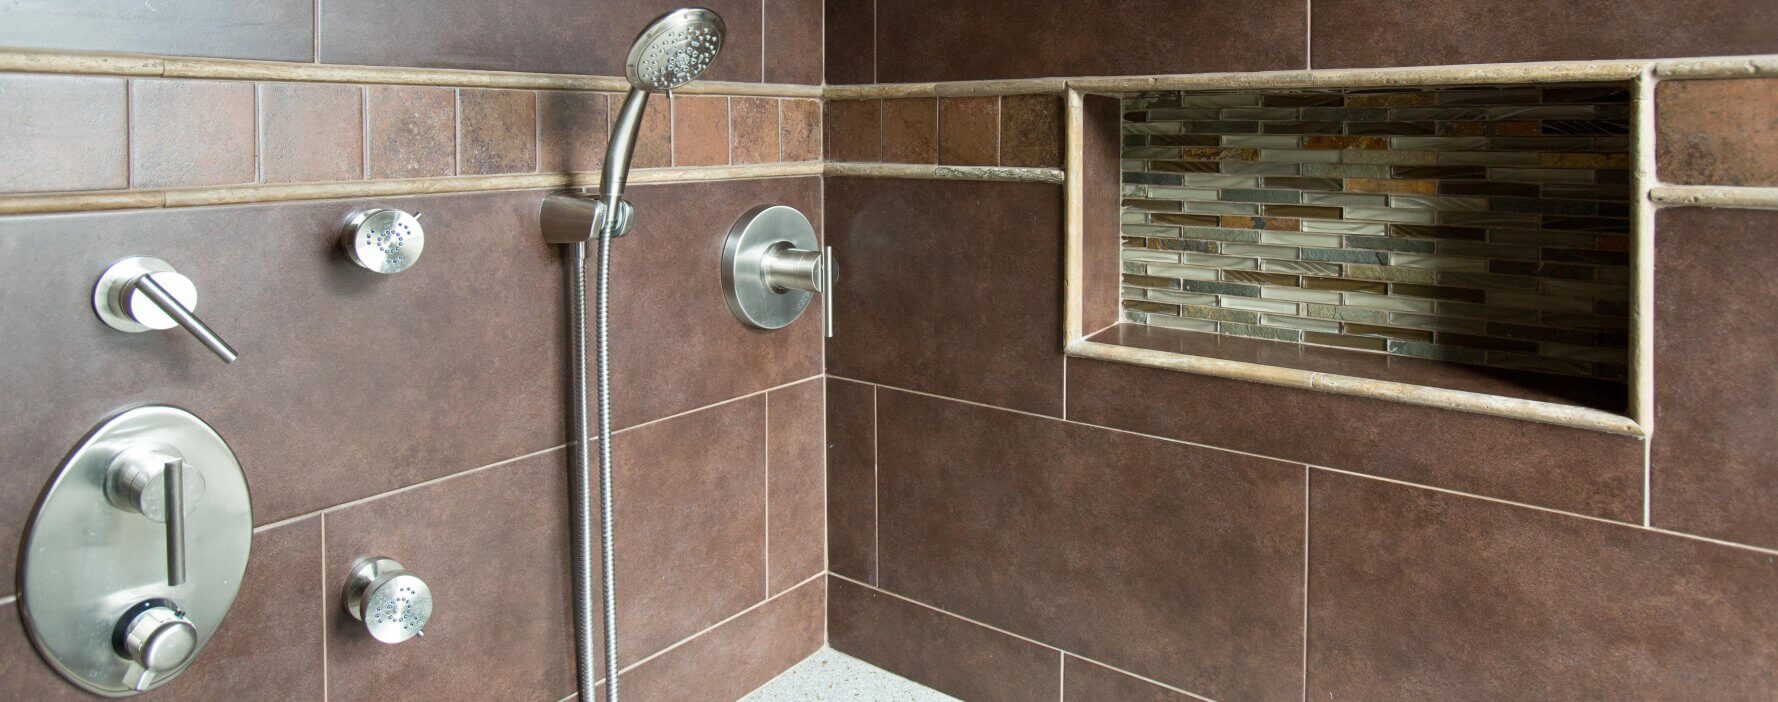 a bathroom with a shower head and hand held shower heads